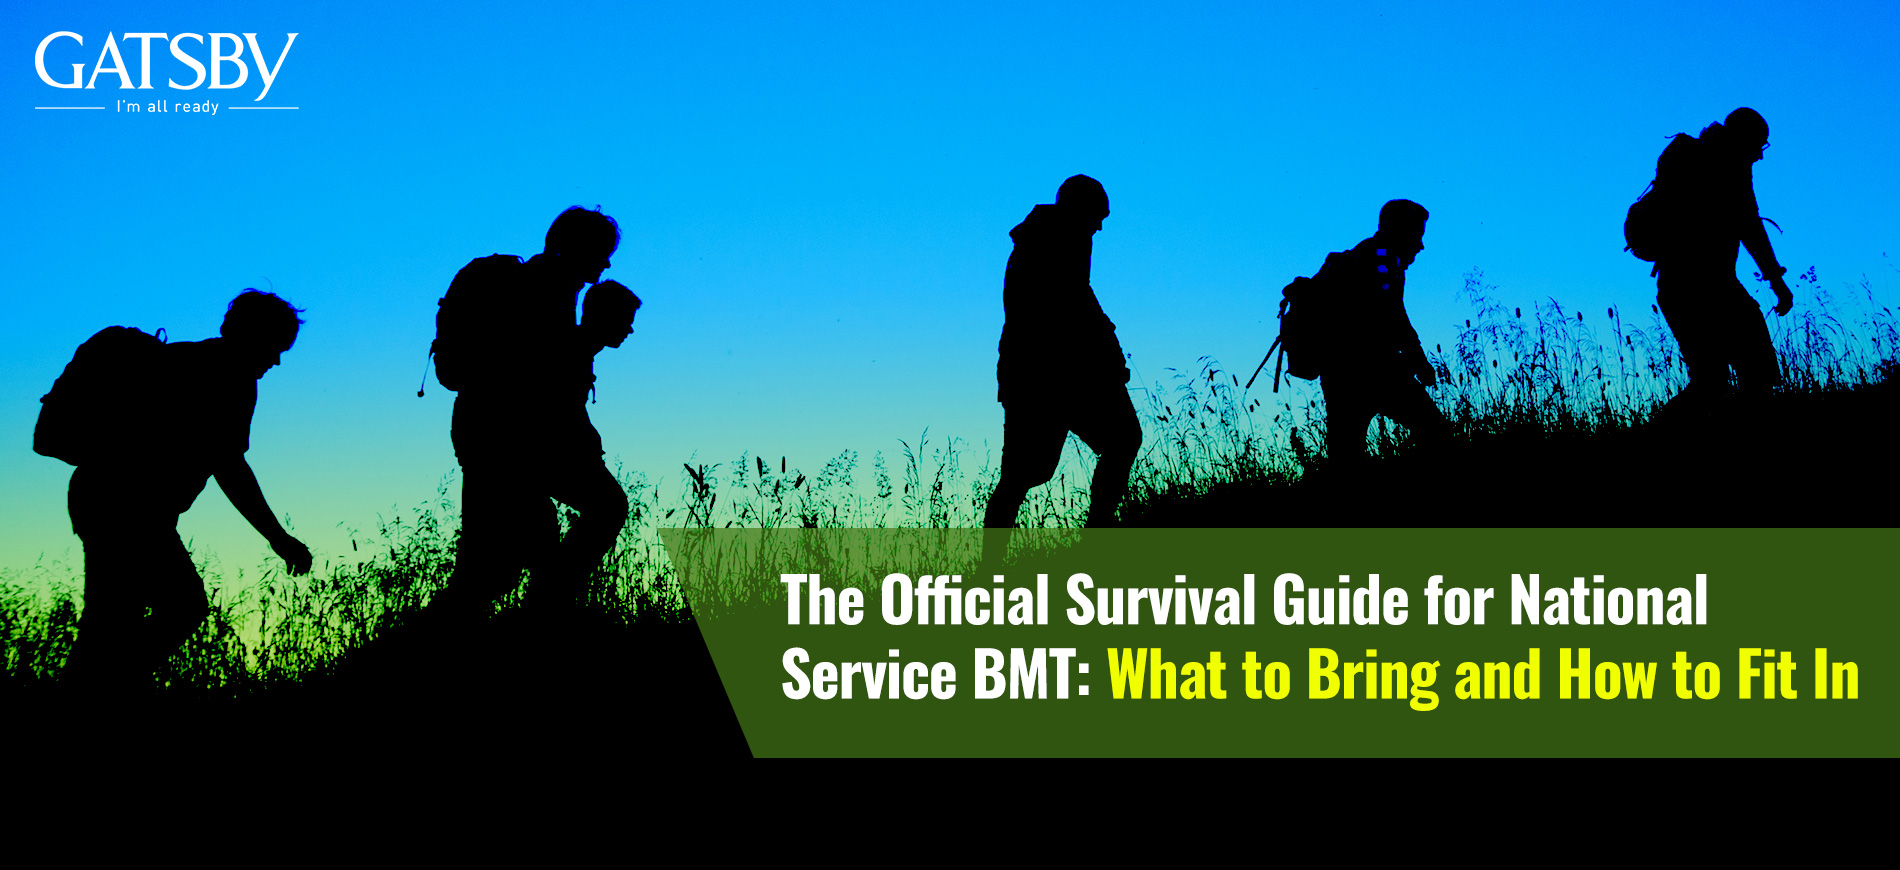 The Official Survival Guide for National Service BMT: What to Bring and How to Fit In